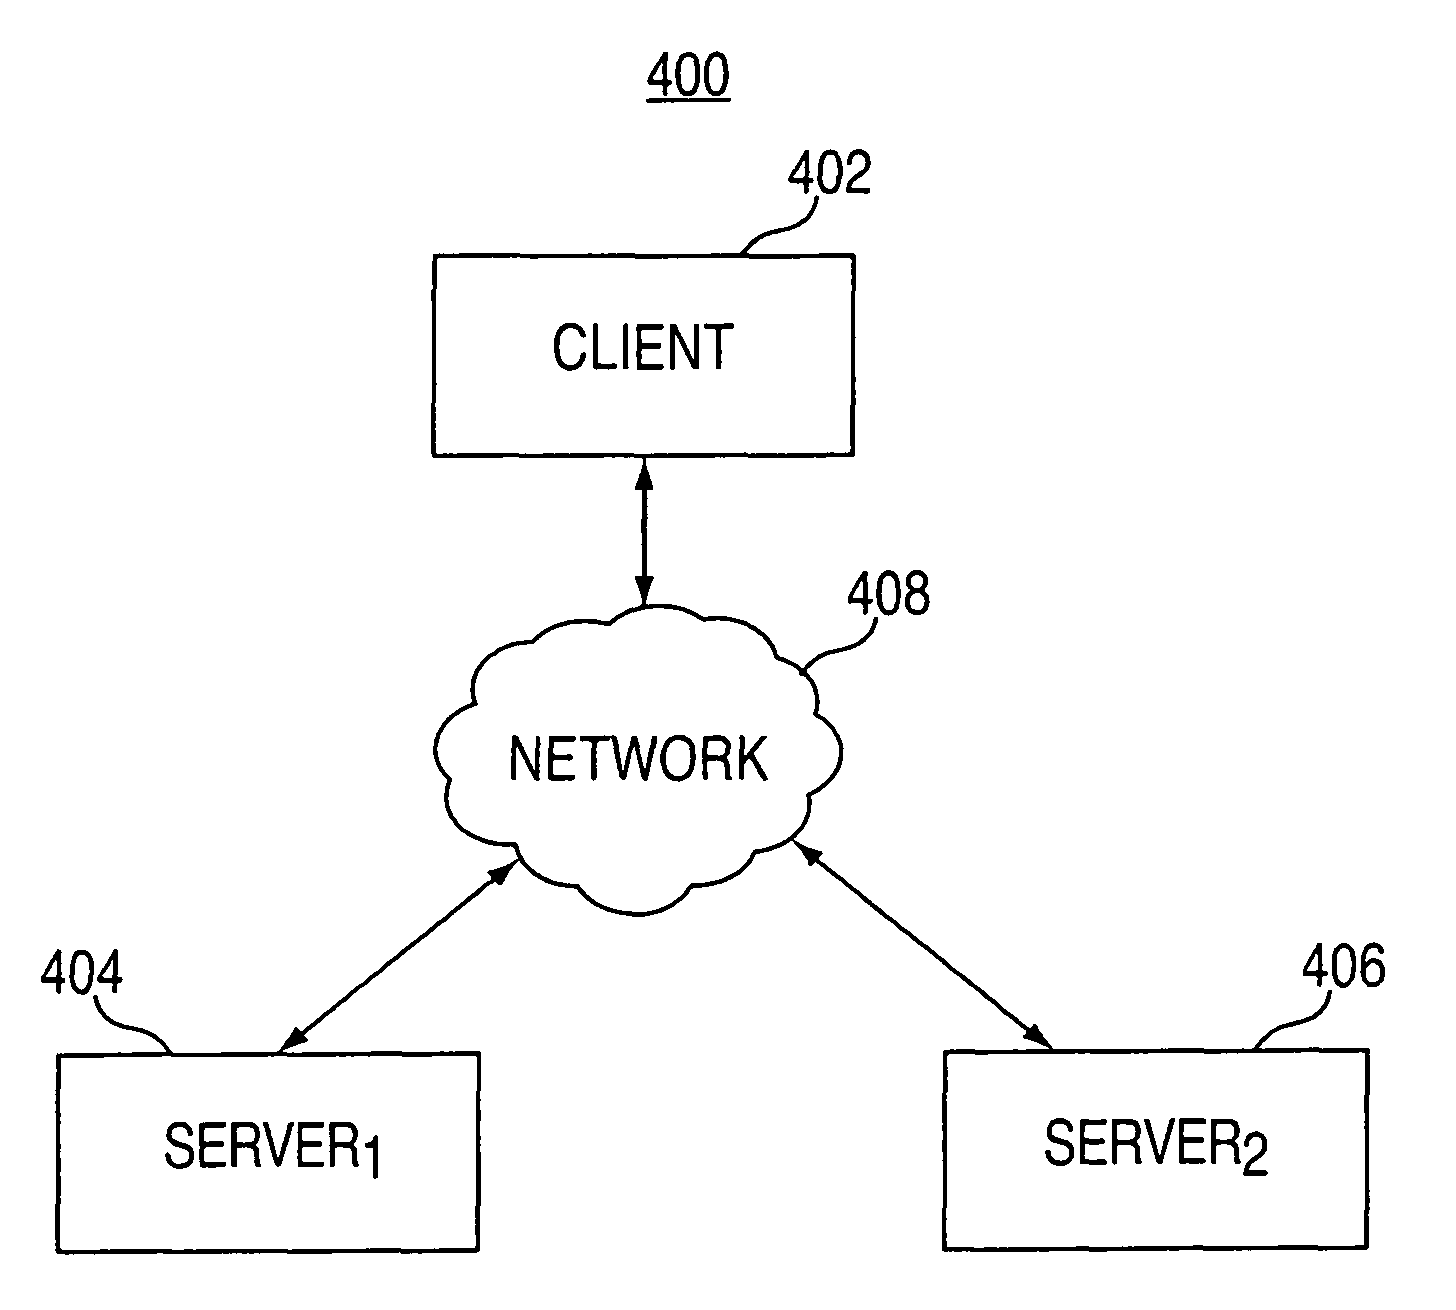 Systems and methods for verifying the authenticity of a remote device